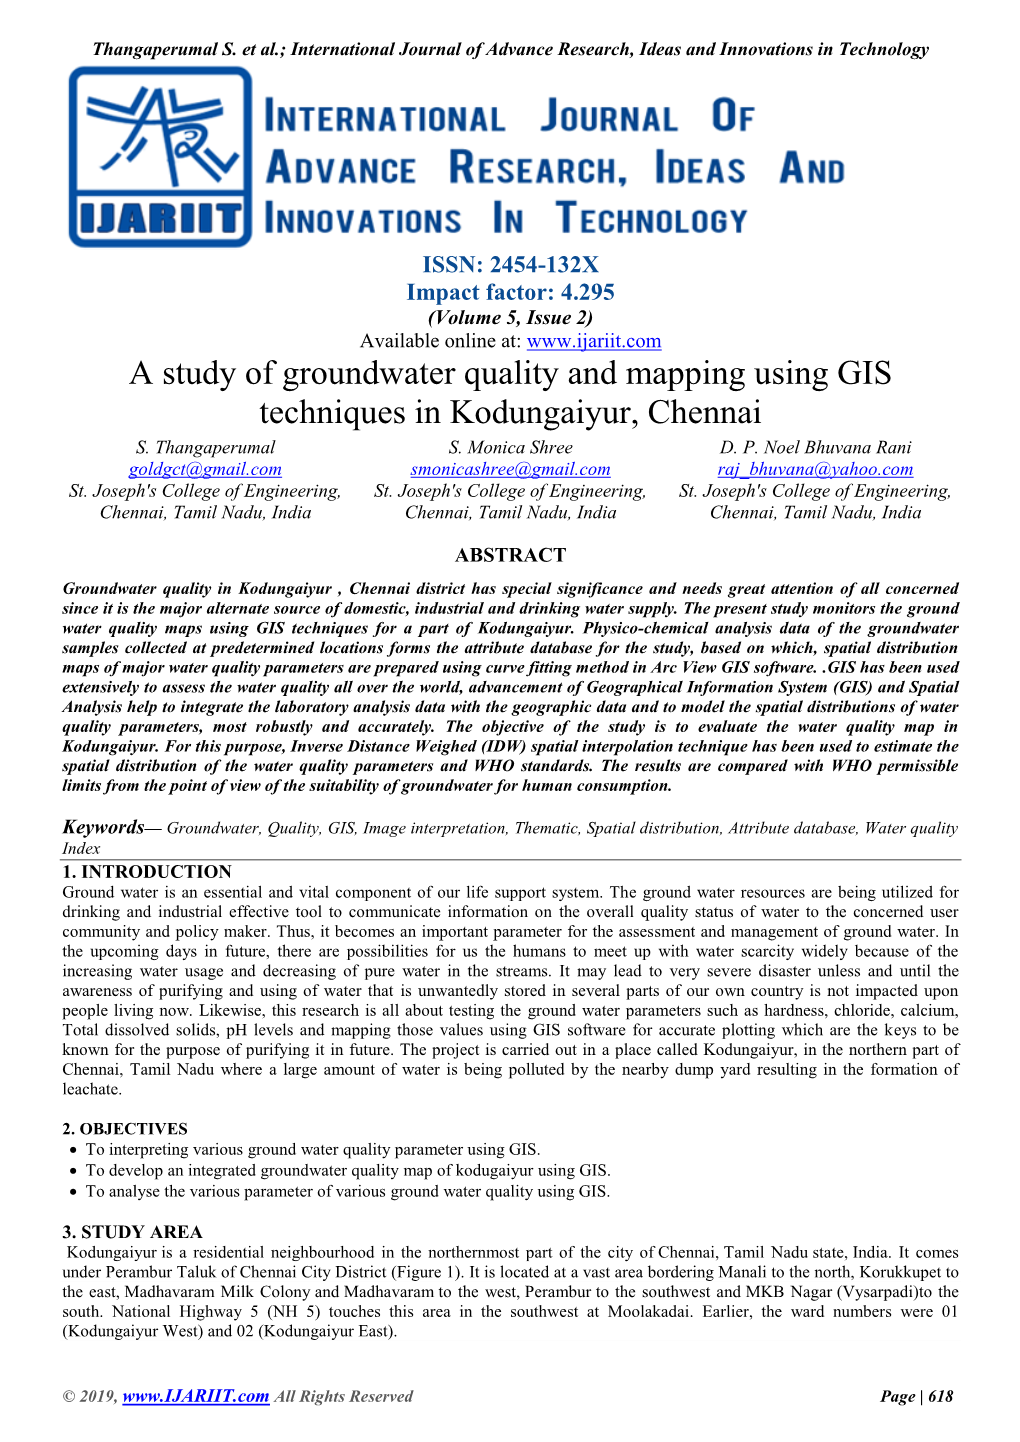 A Study of Groundwater Quality and Mapping Using GIS Techniques in Kodungaiyur, Chennai S